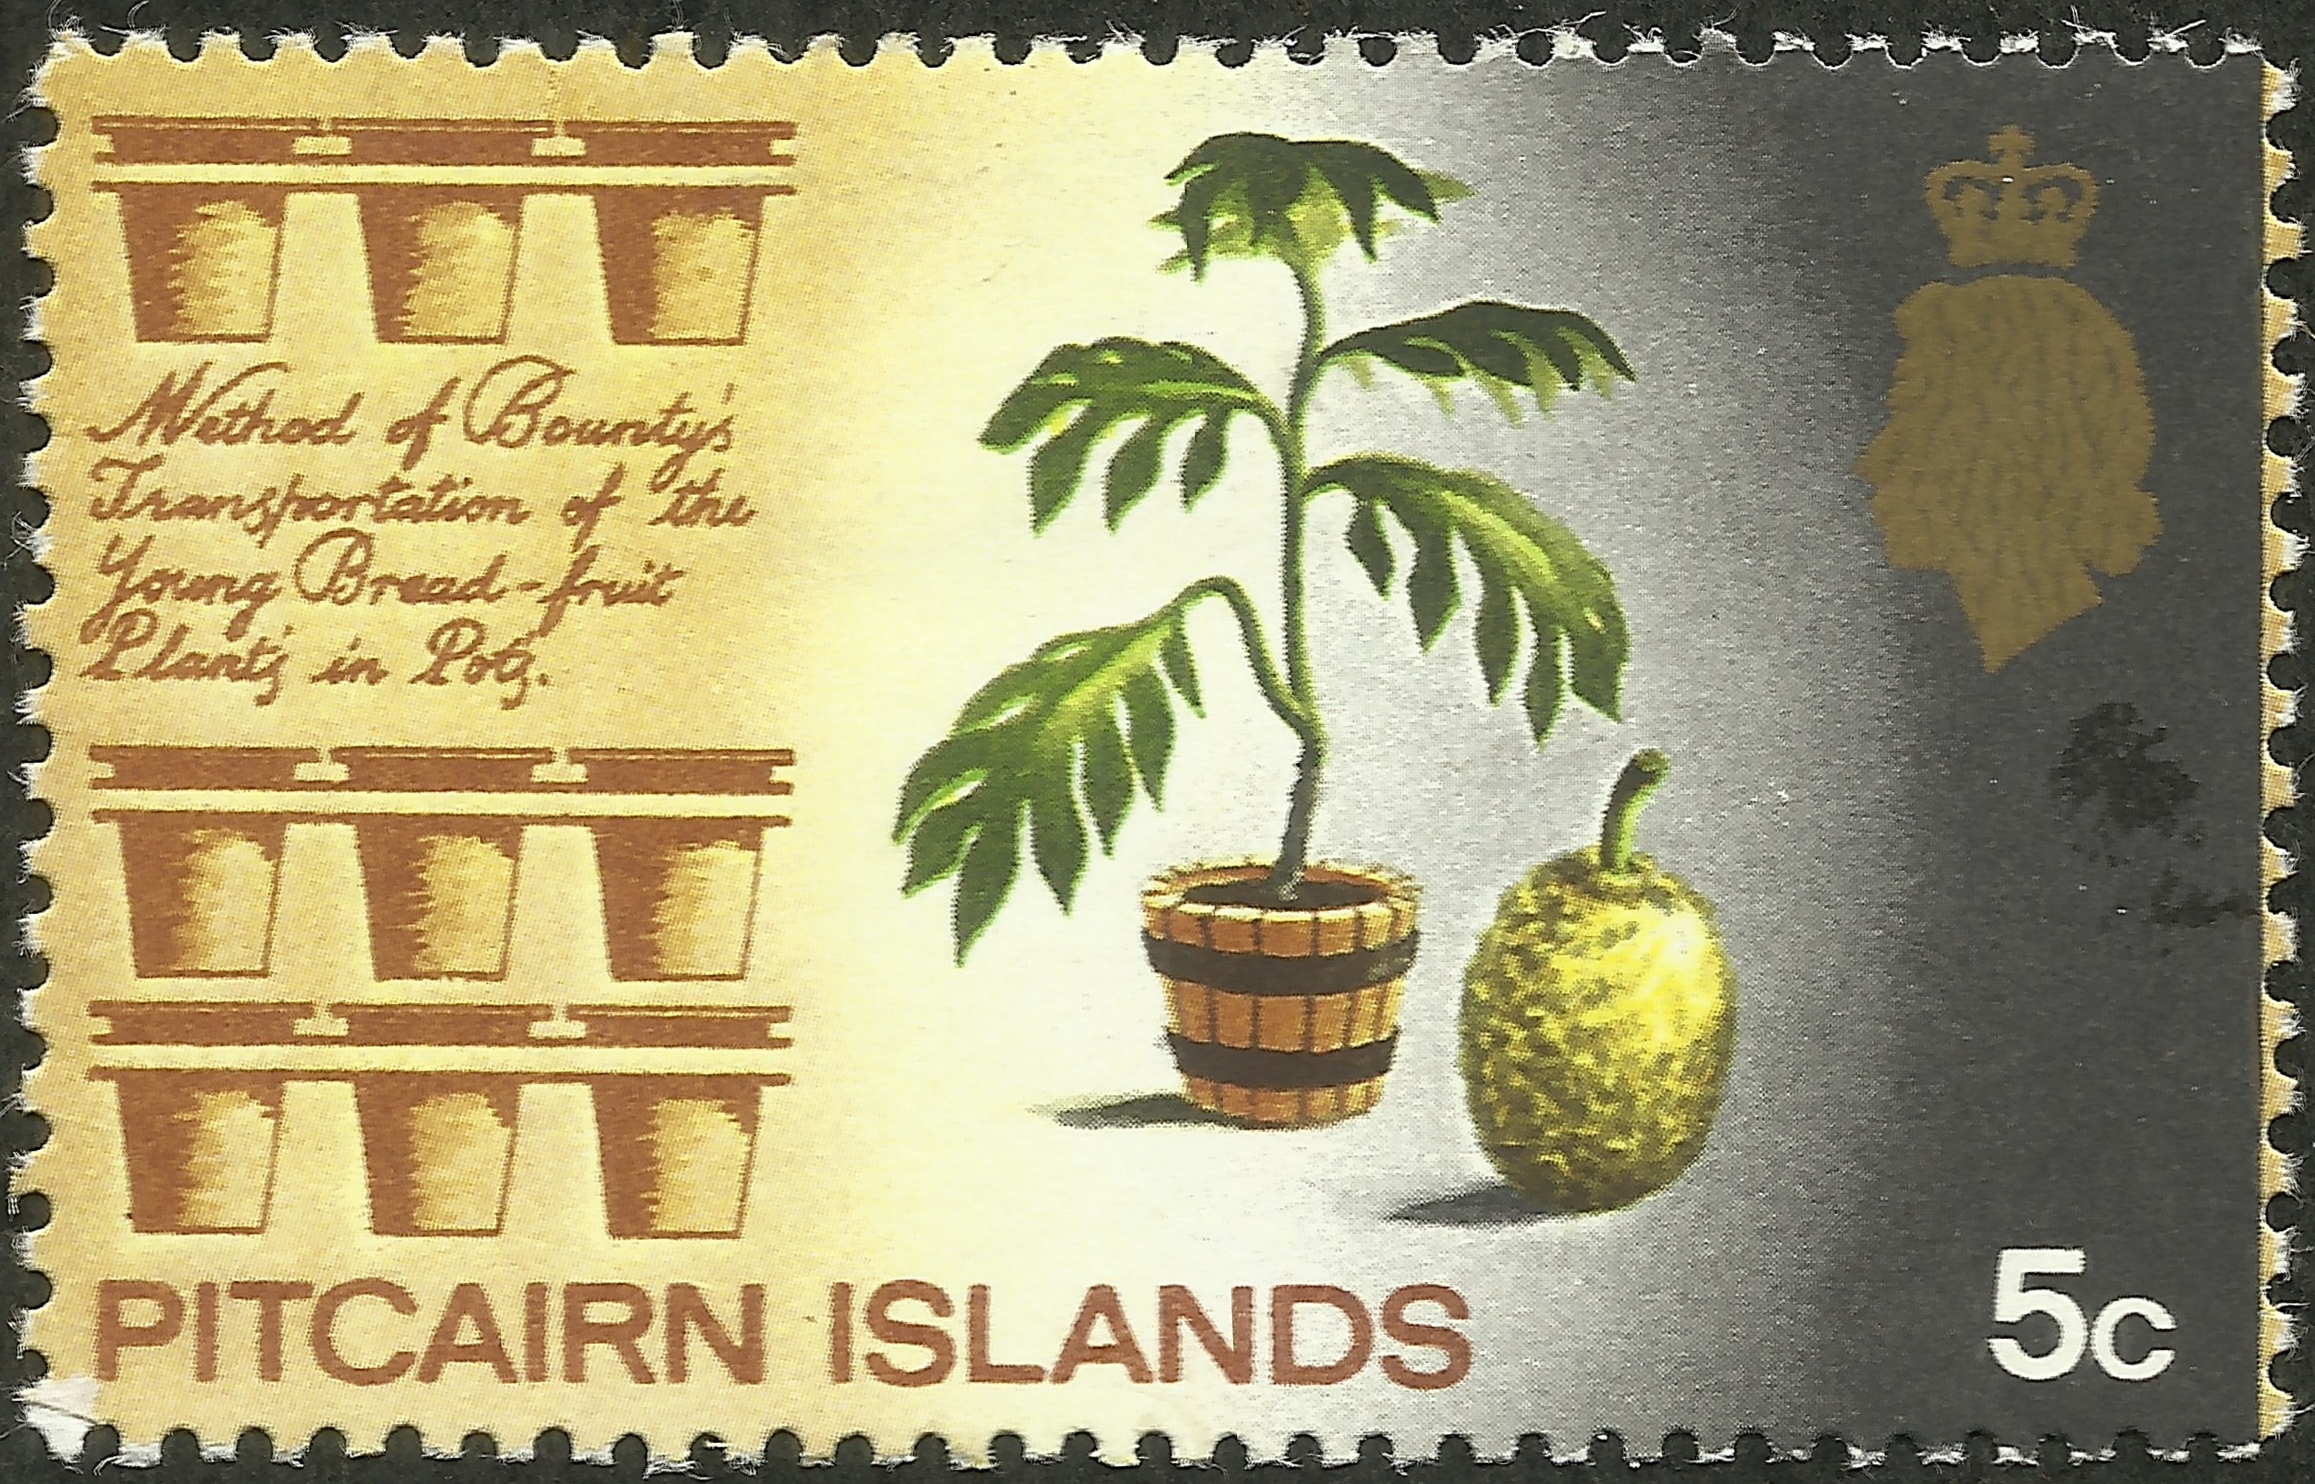 Pitcairn Islands - Scott #101 (1969) depicting a breadfruit plant and the pots designed to transport them on HMAV Bounty.